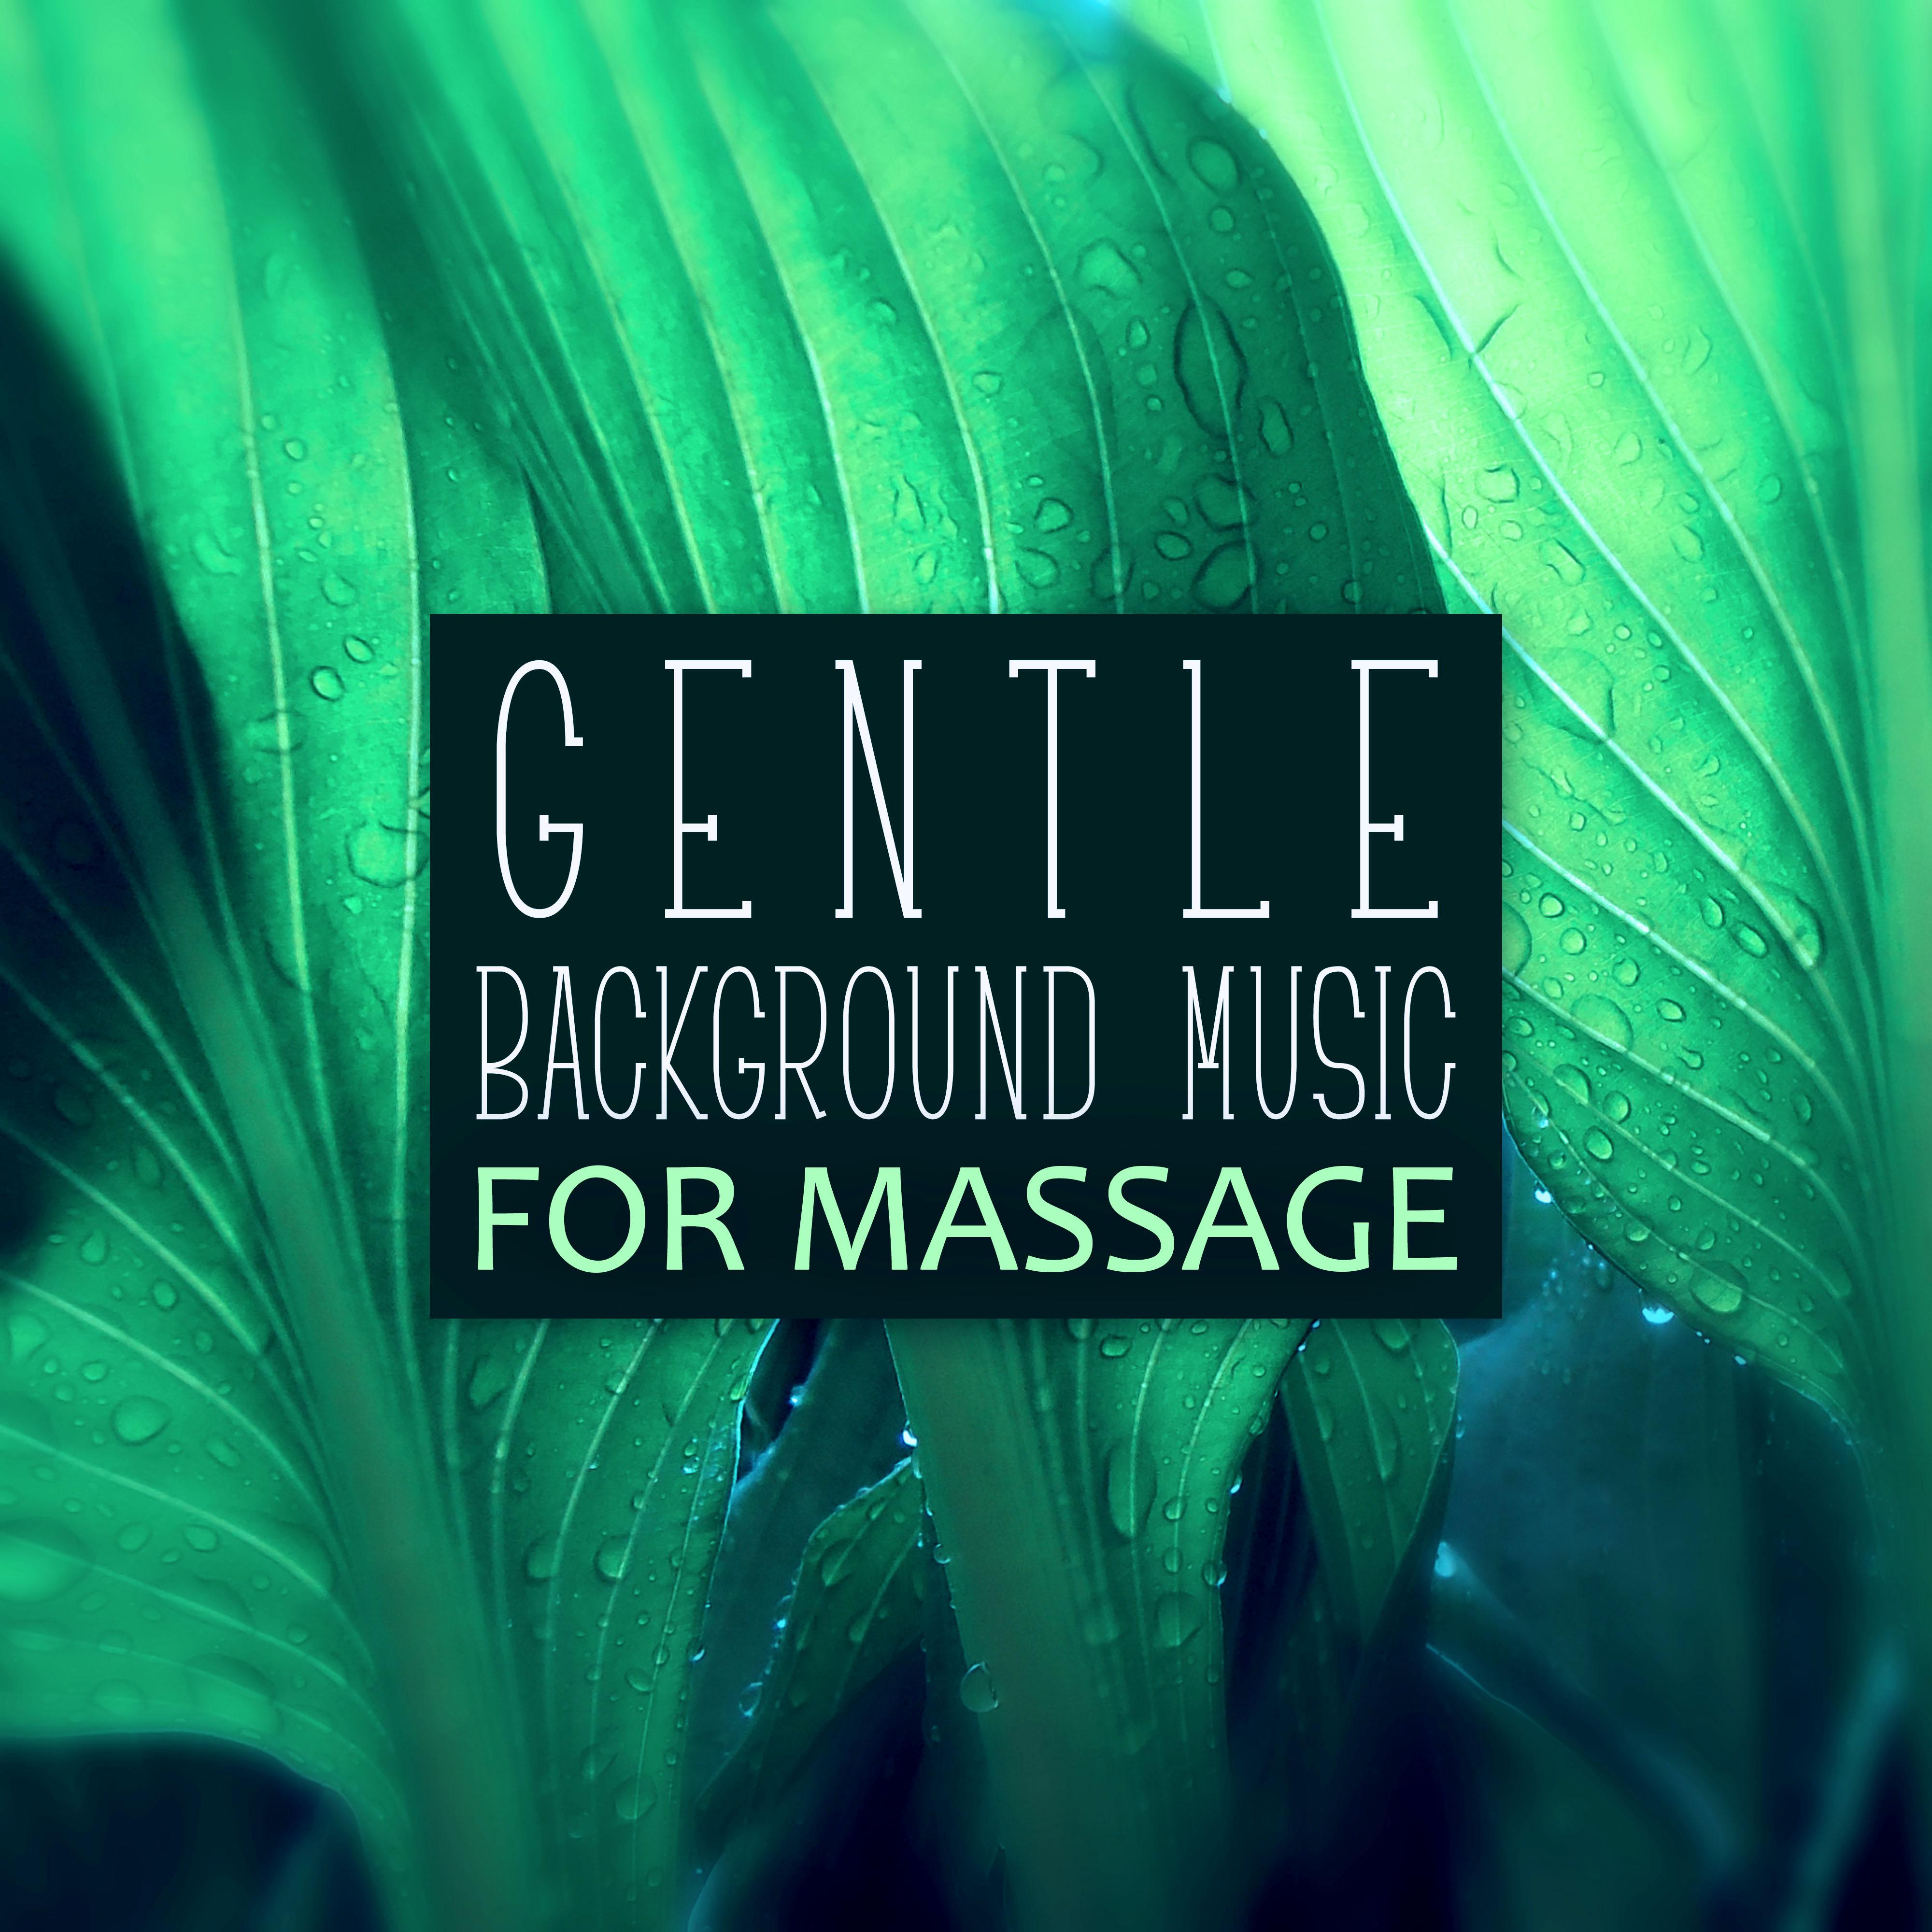 Gentle Background Music for Massage - Soft Nature Sounds for Reflexology, Shiatsu and Acupressure, Healing Touch, Deep Sounds for Relaxation, Calm Music for Massage